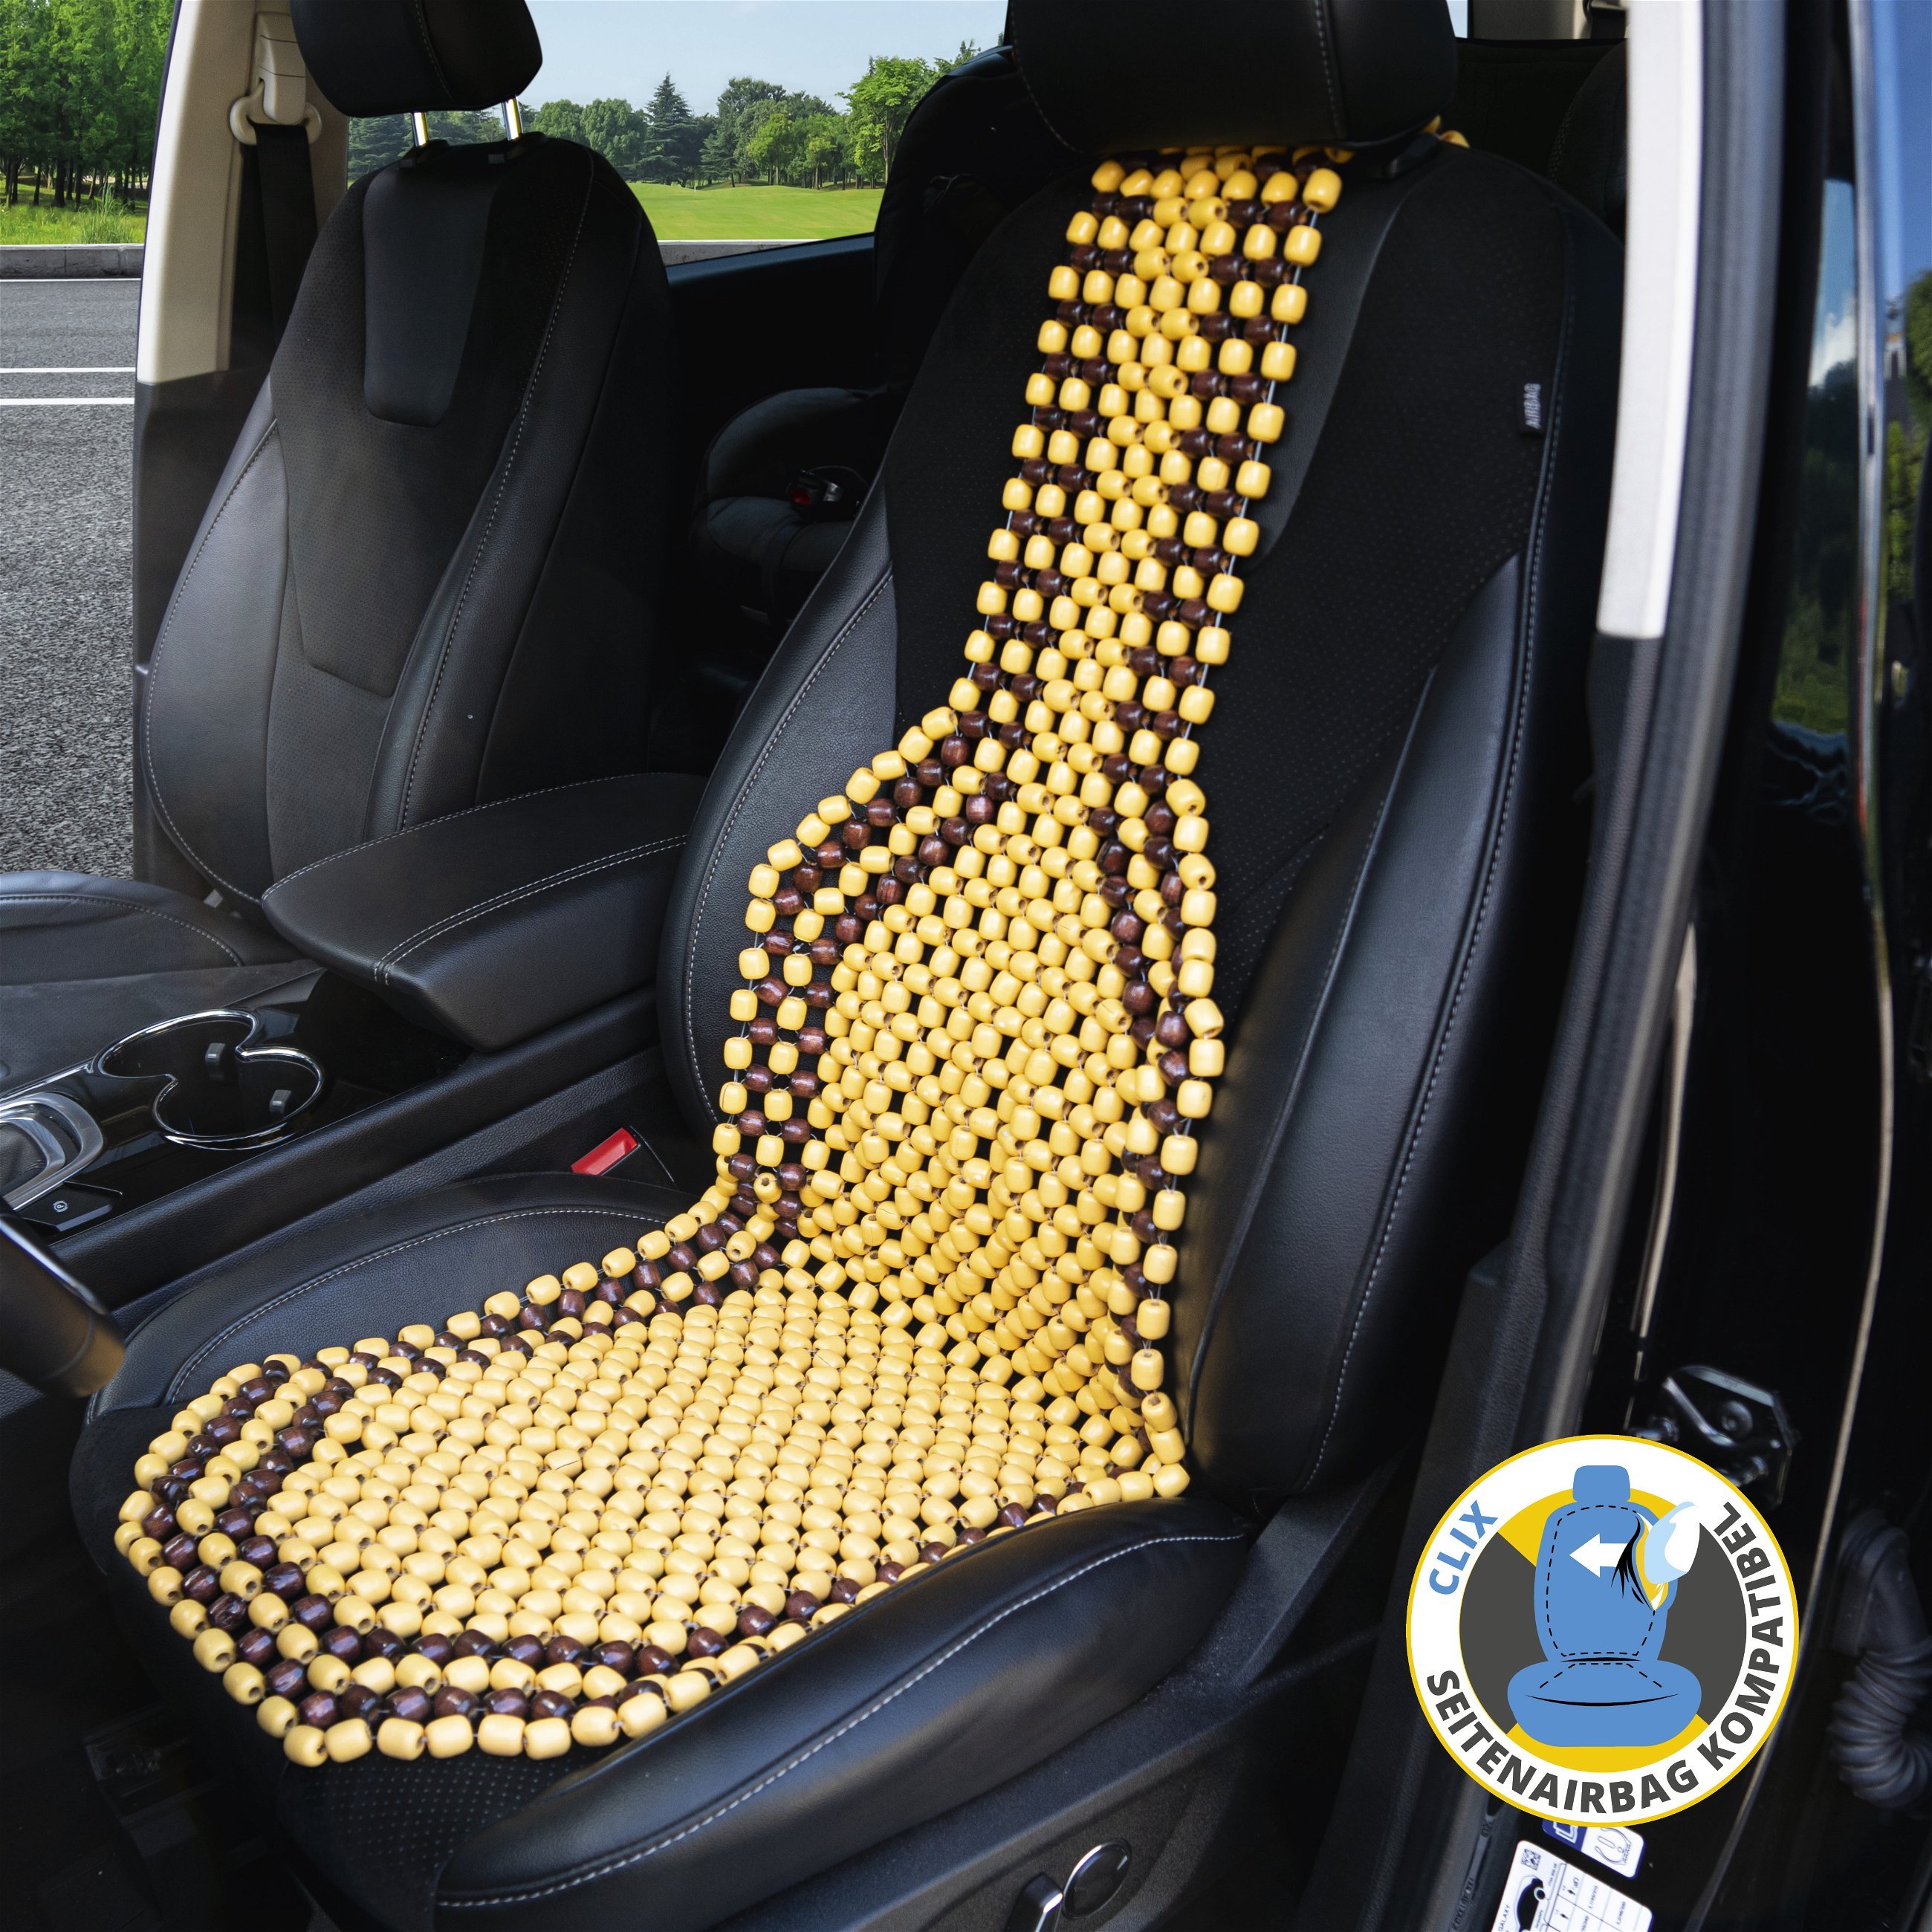 Car Seat cover made of wood beads nature